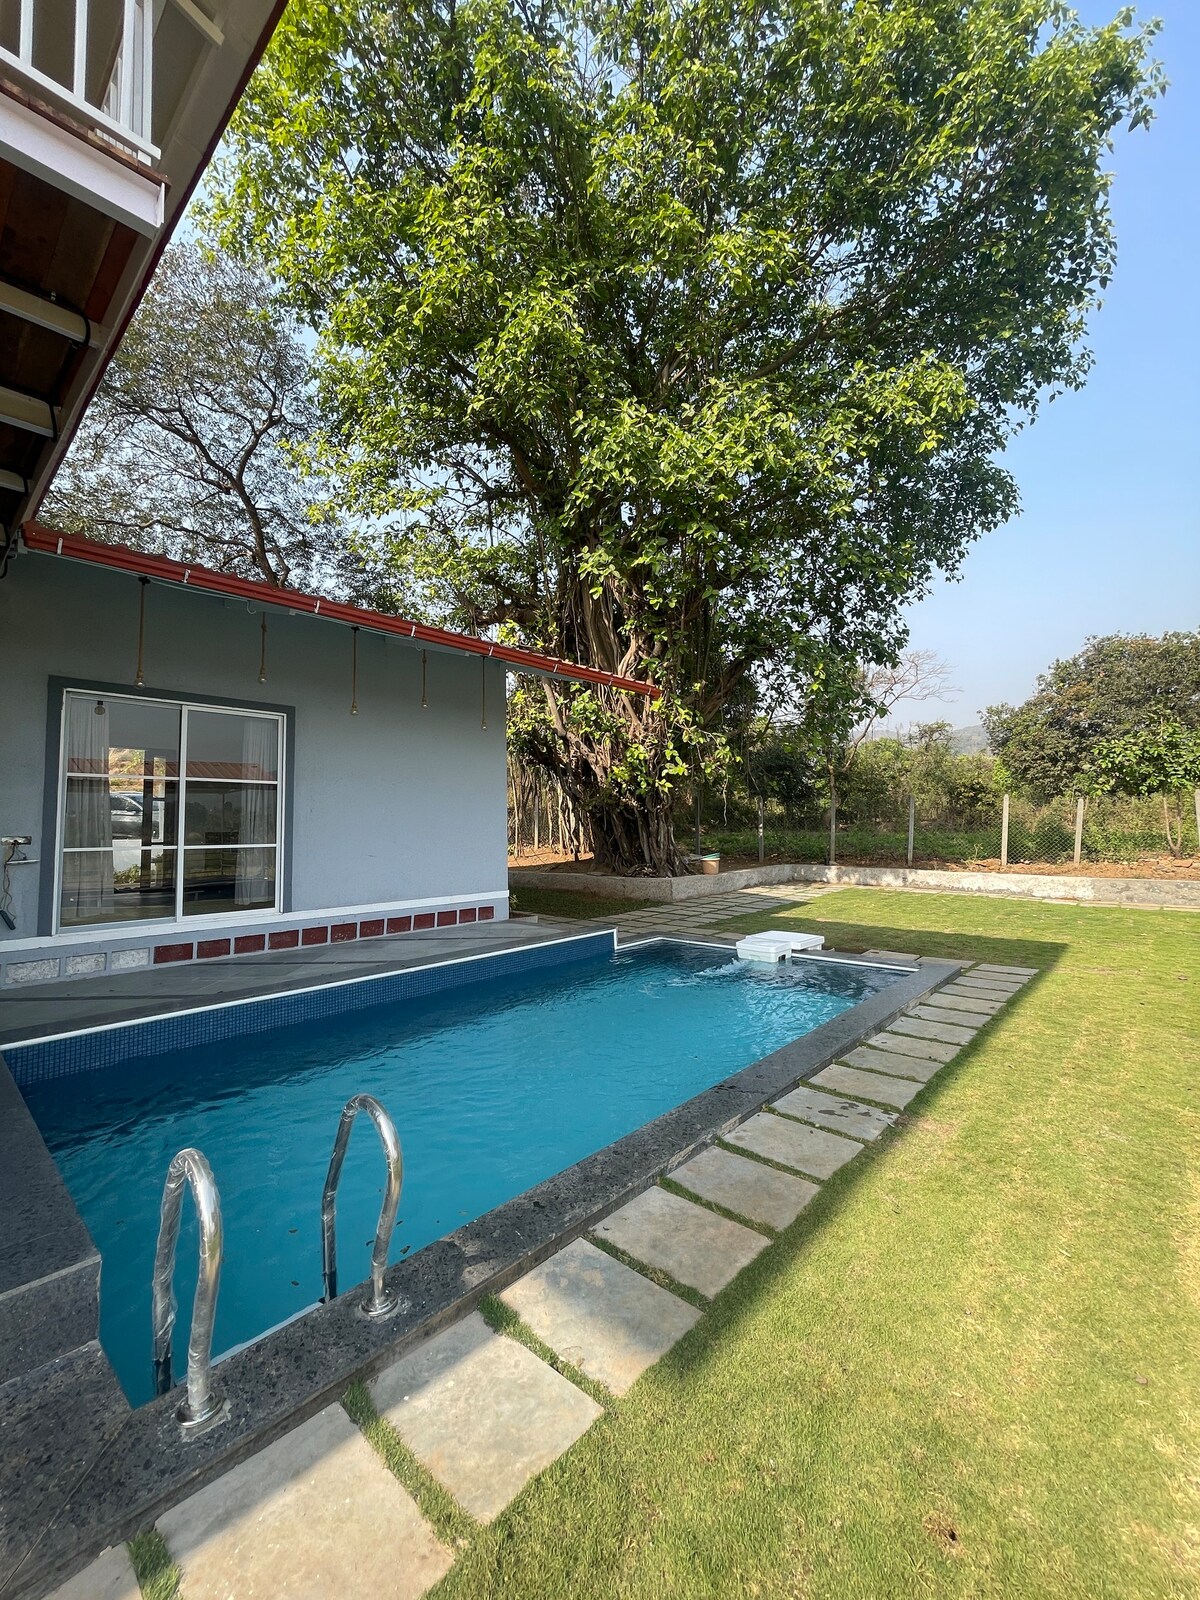 The Banyan Tree Villas - B1 ( with private pool )